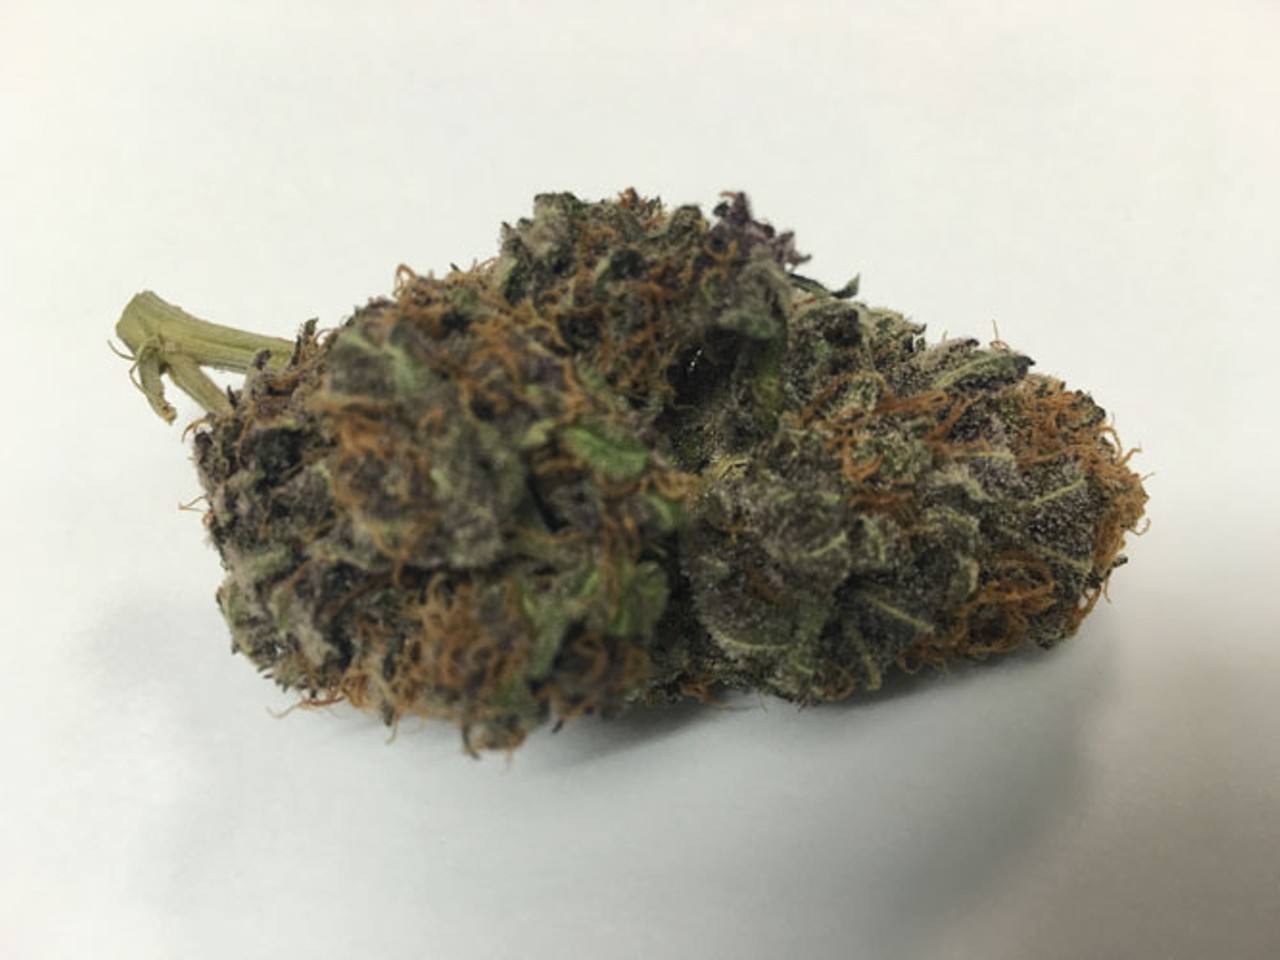 CodeGreen Detroit
Iced Grapefruit 
A hybrid of the ICED and Grapefruit strains, this bud is good for both pain relief and social activity, and leaves you with a very happy feeling and distinct grapefruit finish. 
15500 E. Eight Mile Rd., Detroit; CodeGreen Detroit on Facebook; ;313-649-2755.